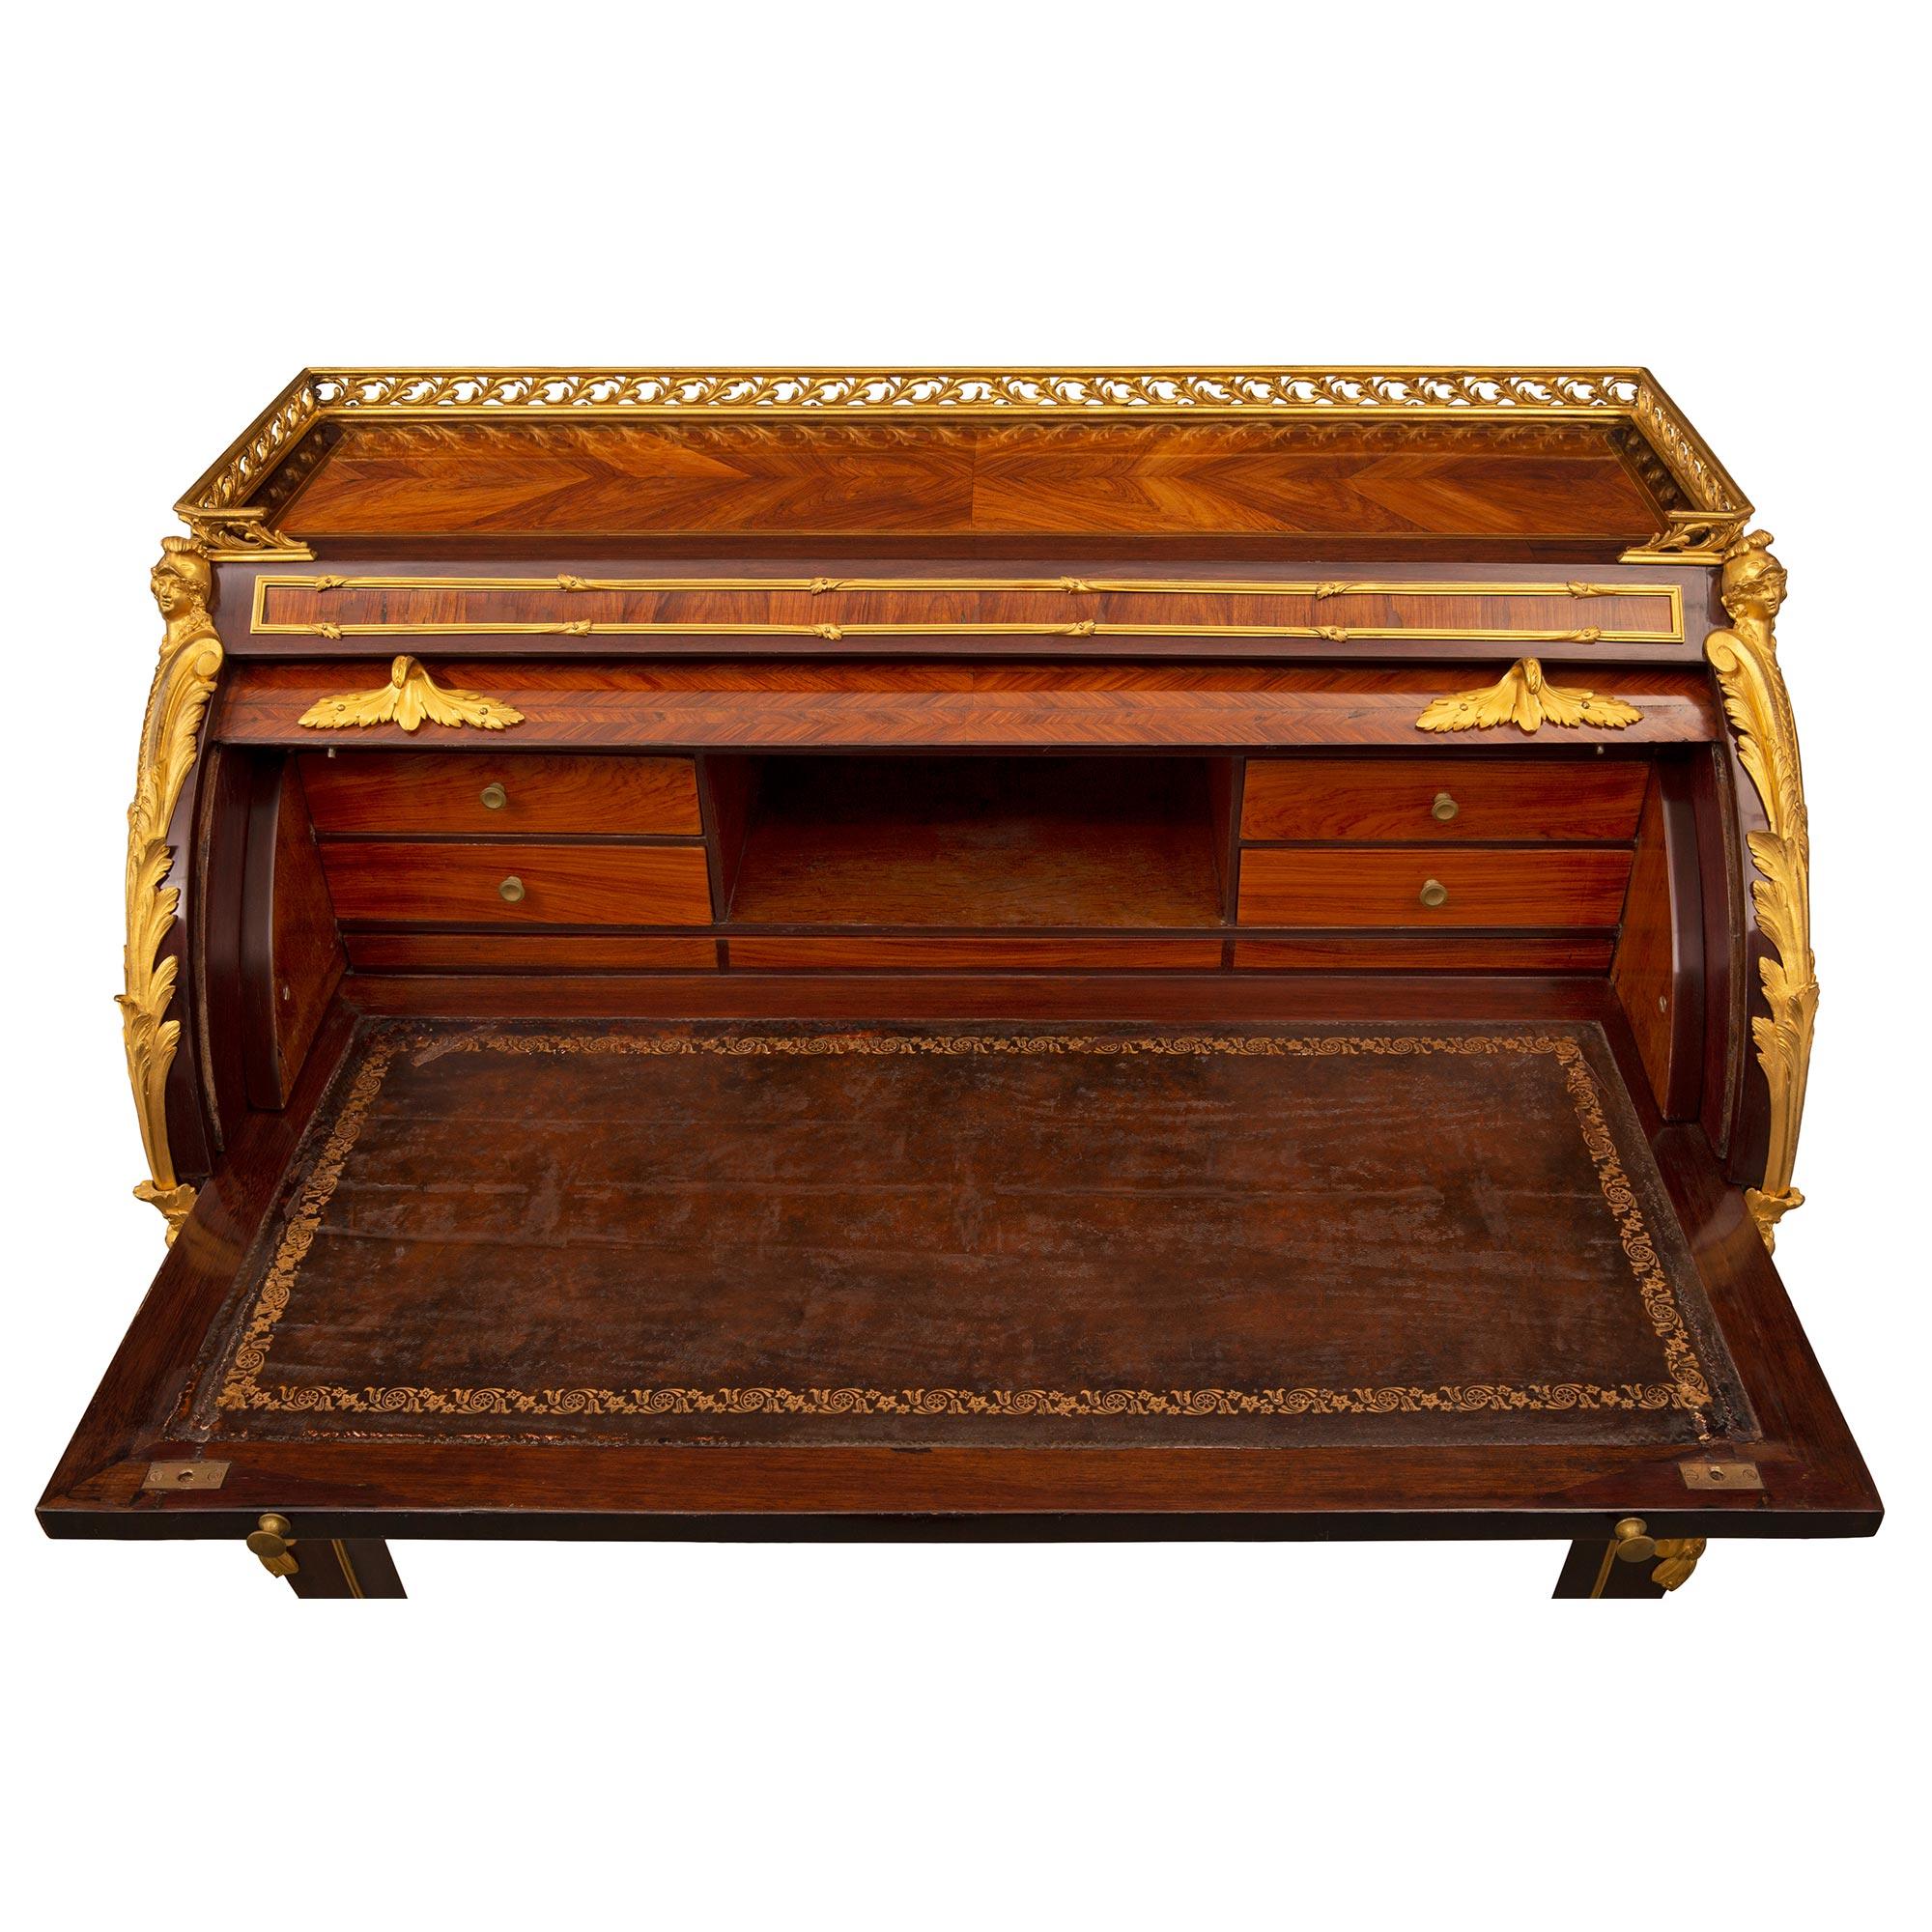 French 18th Century Louis XV Period Kingwood, Tulipwood and Ormolu Desk For Sale 3